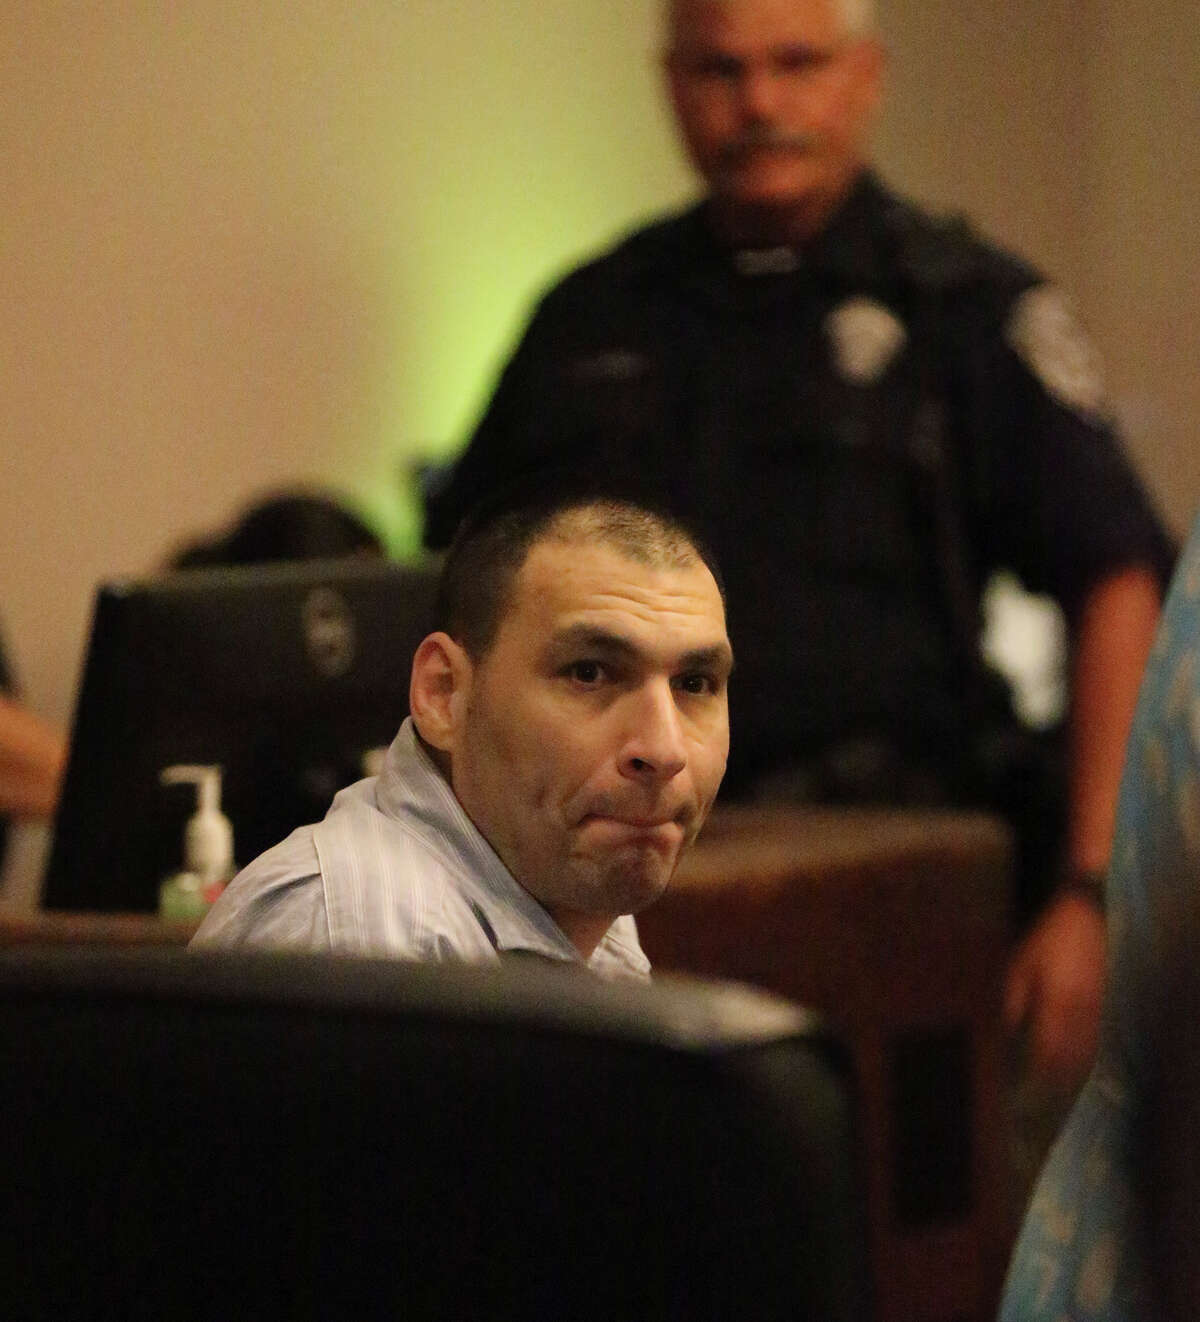 LEFT: Gonzalez awaits sentencing in the 144th state District Court. Gonzalez’s sentence falls between the minimum of 25 years and a 30-year plea offer he refused.